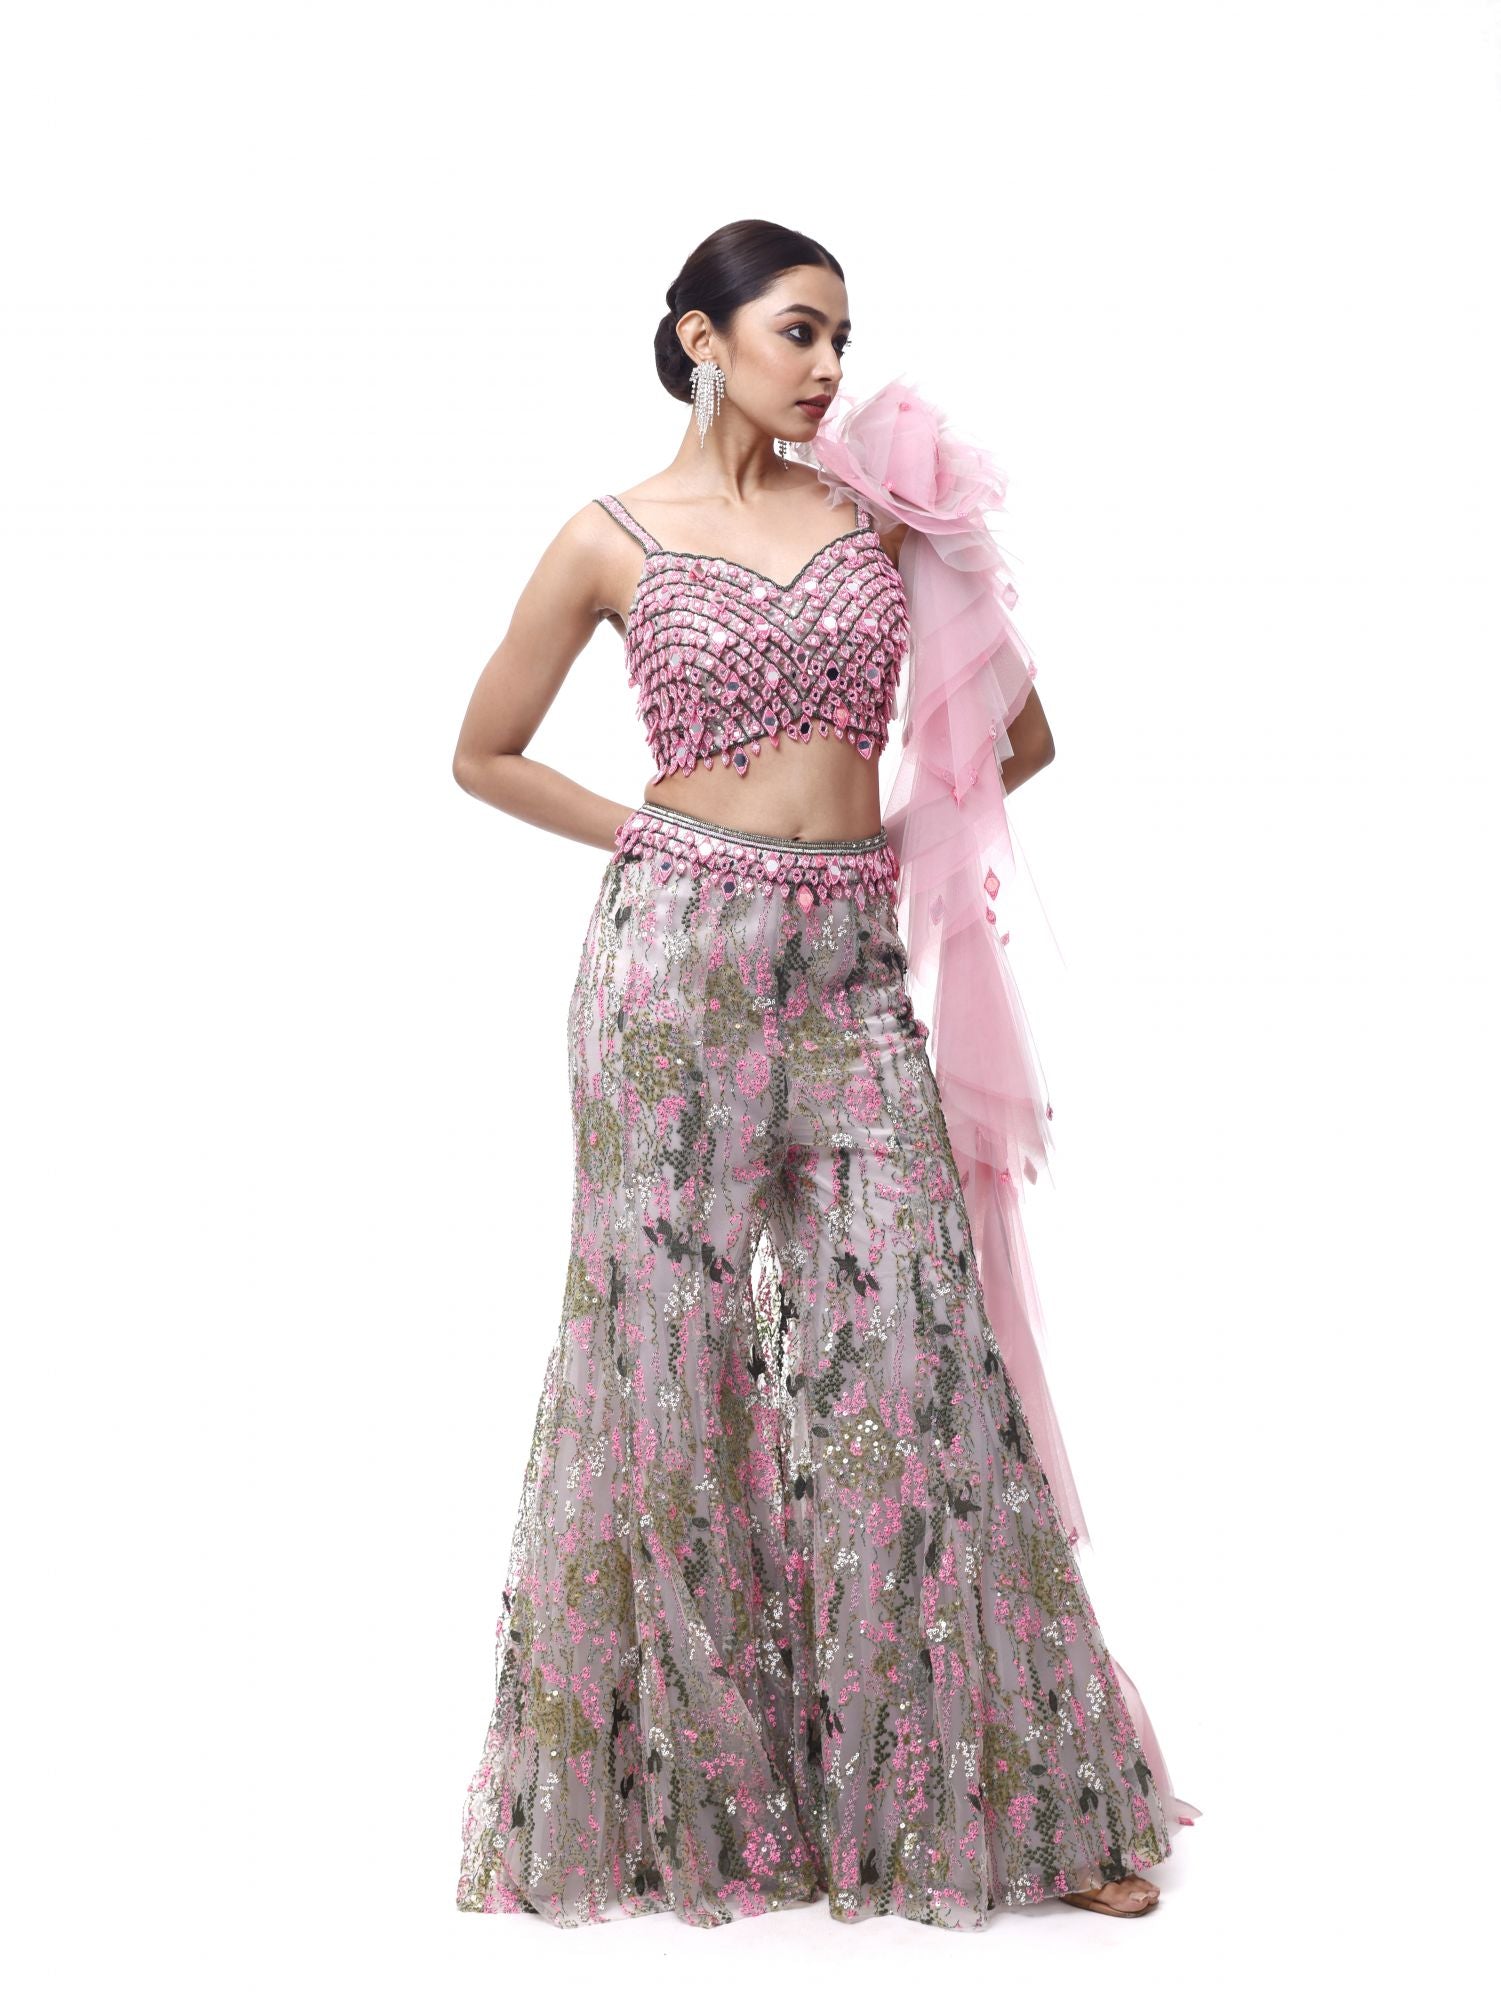 Buy beautiful grey and pink net and organza co-ord set online in USA. Shop the best and latest designs in embroidered sarees, designer sarees, Anarkali suit, lehengas, sharara suits for weddings and special occasions from Pure Elegance Indian fashion store in USA.-side